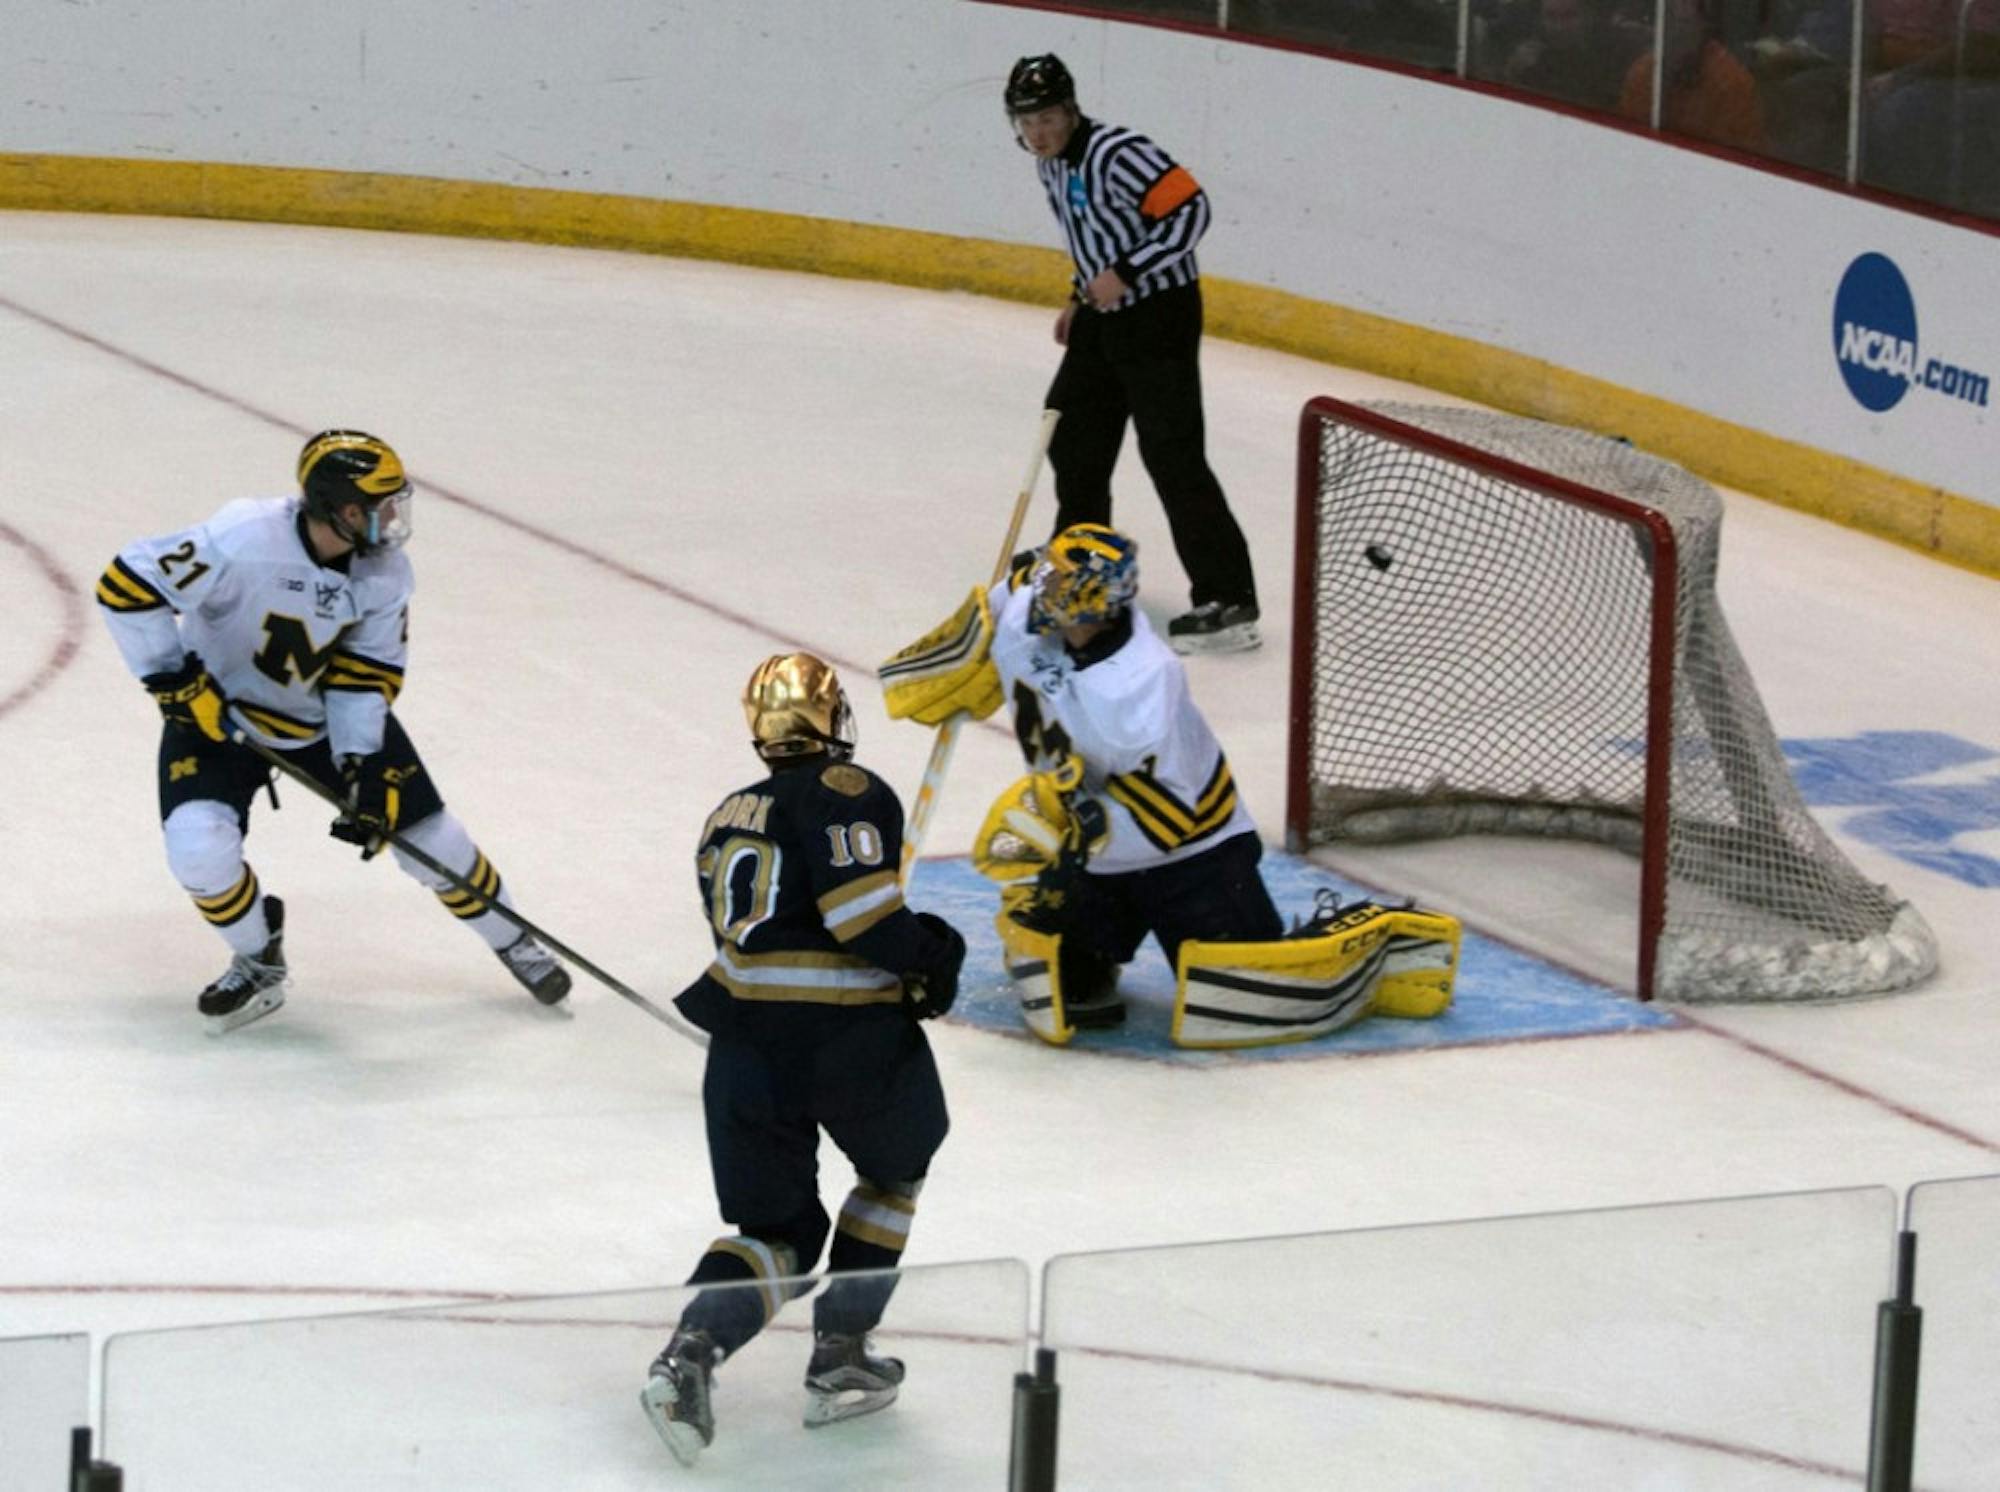 Irish sophomore left wing Anders Bjork scores over the goalie’s shoulder in Notre Dame’s 3-2 overtime loss to Michigan in the first round of the NCAA tournament on March 25 at US Bank Arena in Cincinnati.